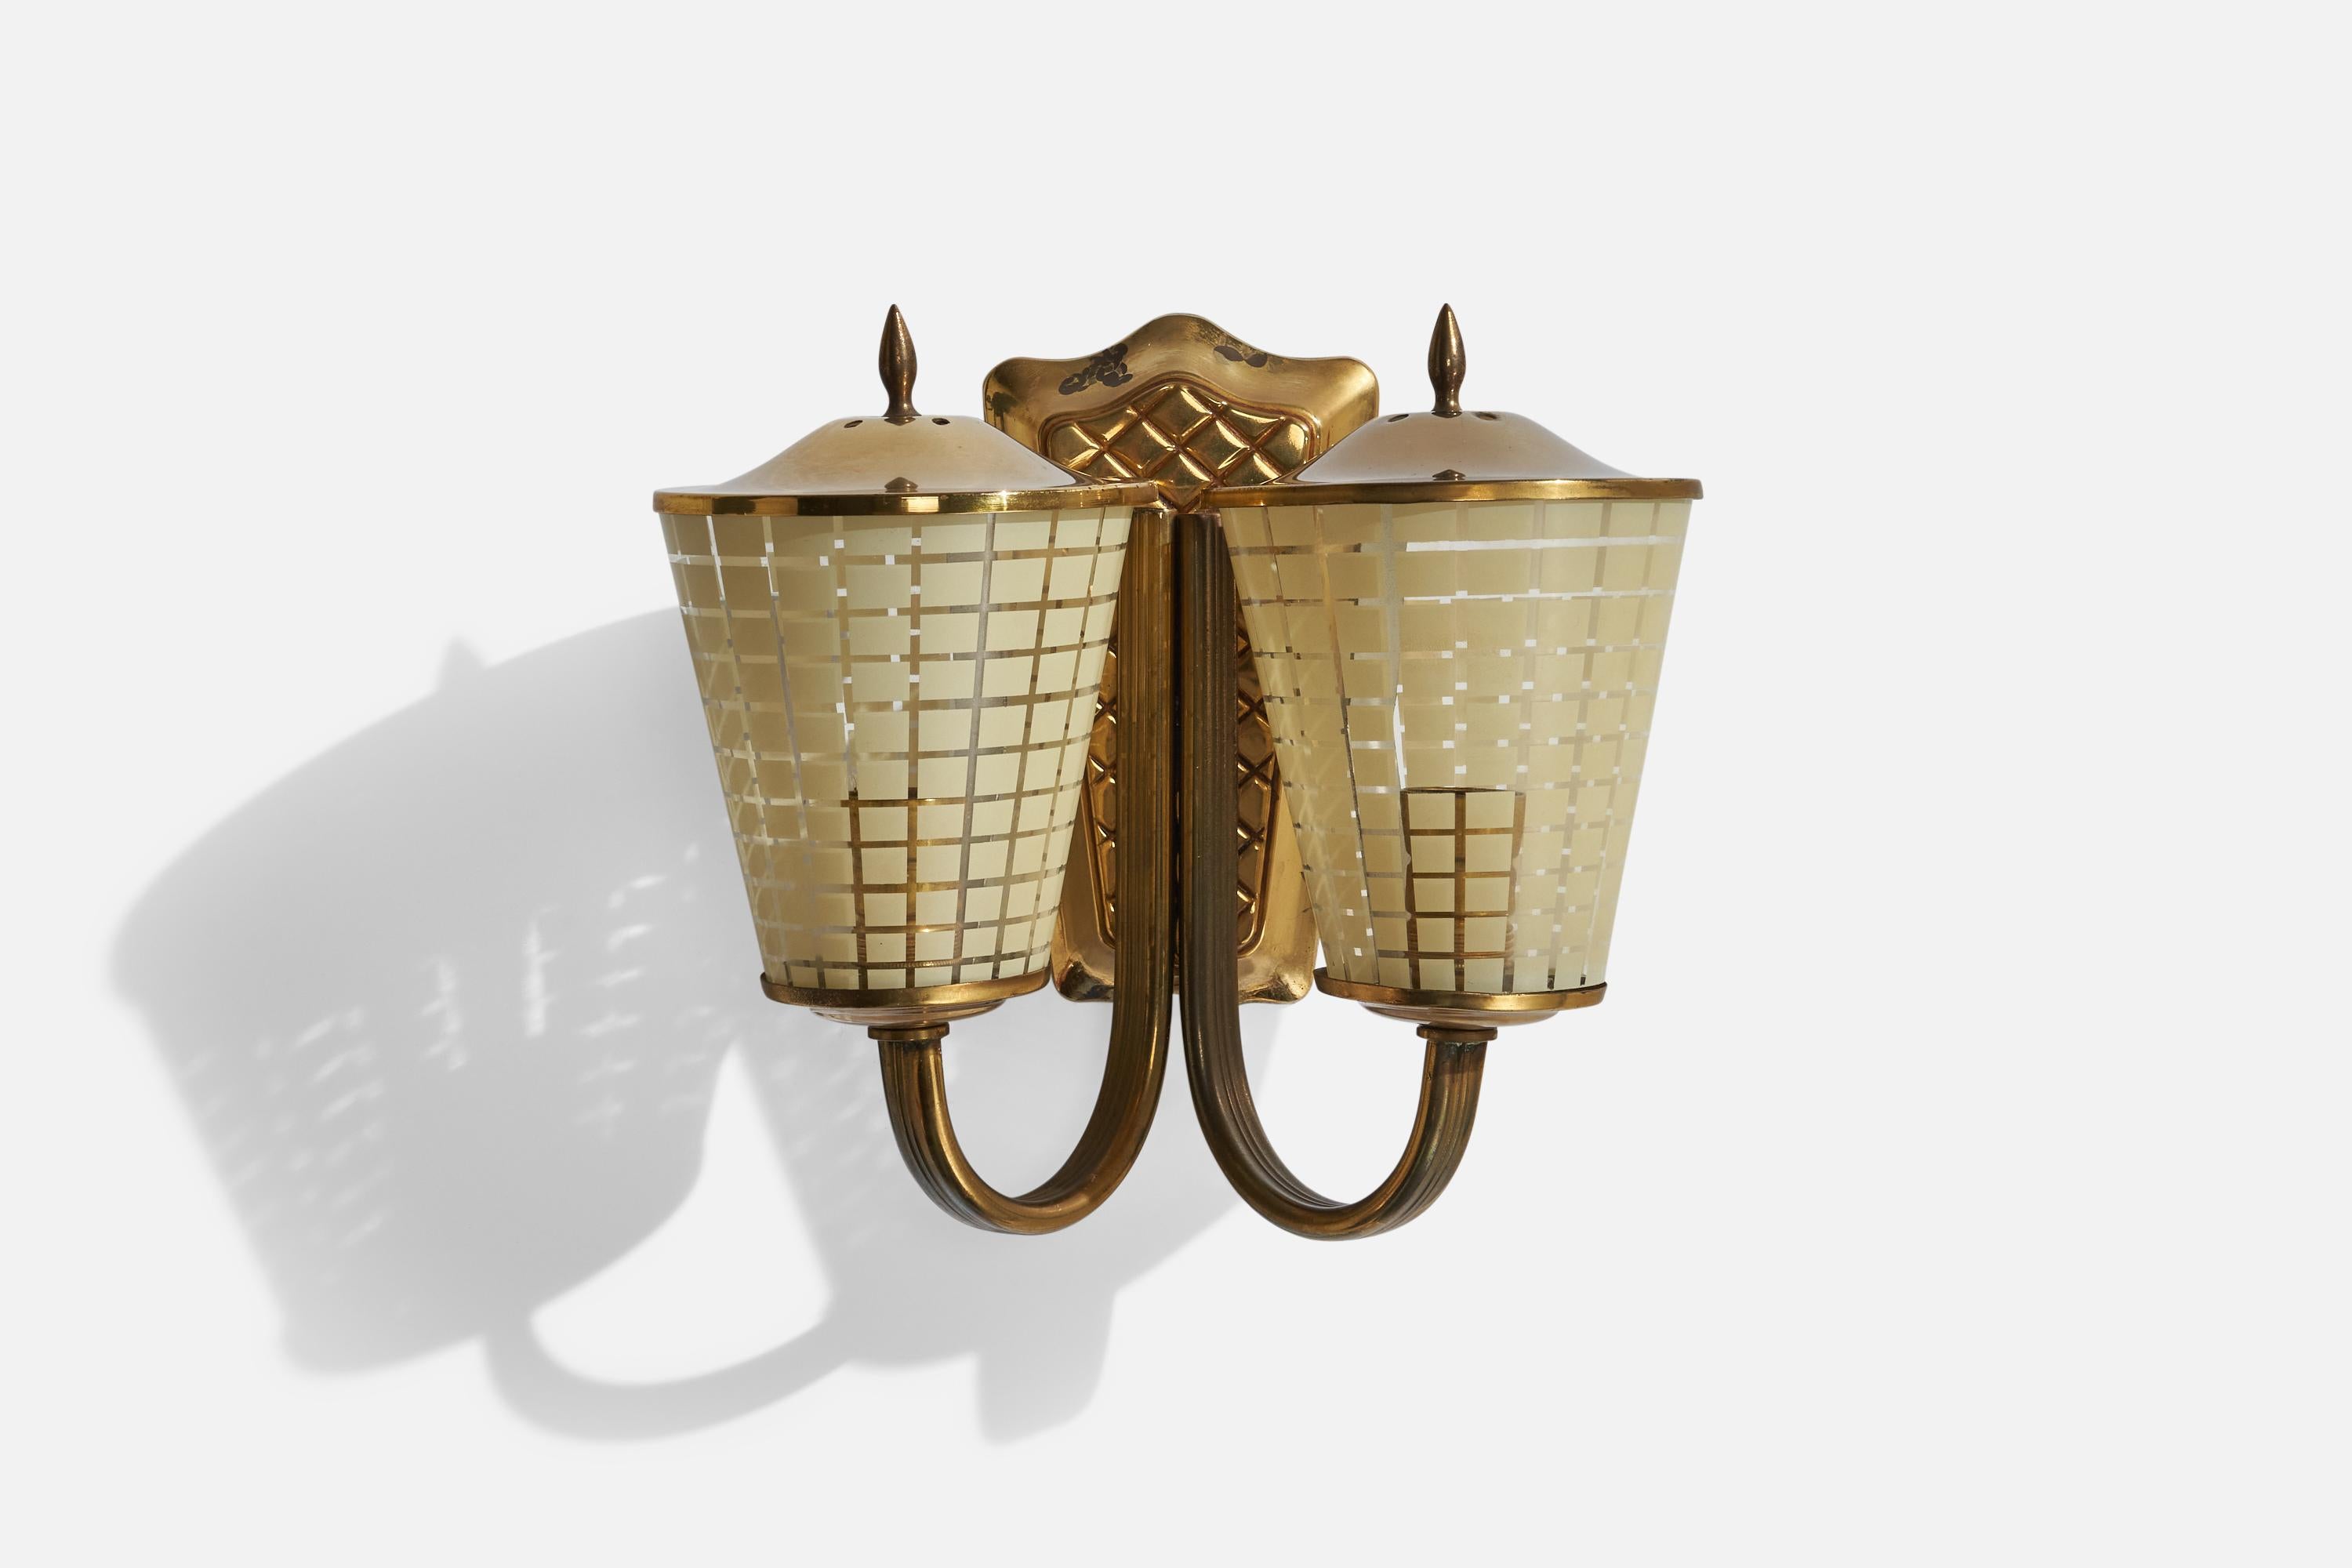 A two-armed brass and etched glass wall light designed and produced in Sweden, c. 1940s.

Overall Dimensions (inches): 8.5” H x 9”  W x 5.25”  D
Back Plate Dimensions (inches): 6.5”  H x 3.75” W x 1.1” D
Bulb Specifications: E-14 Bulb
Number of